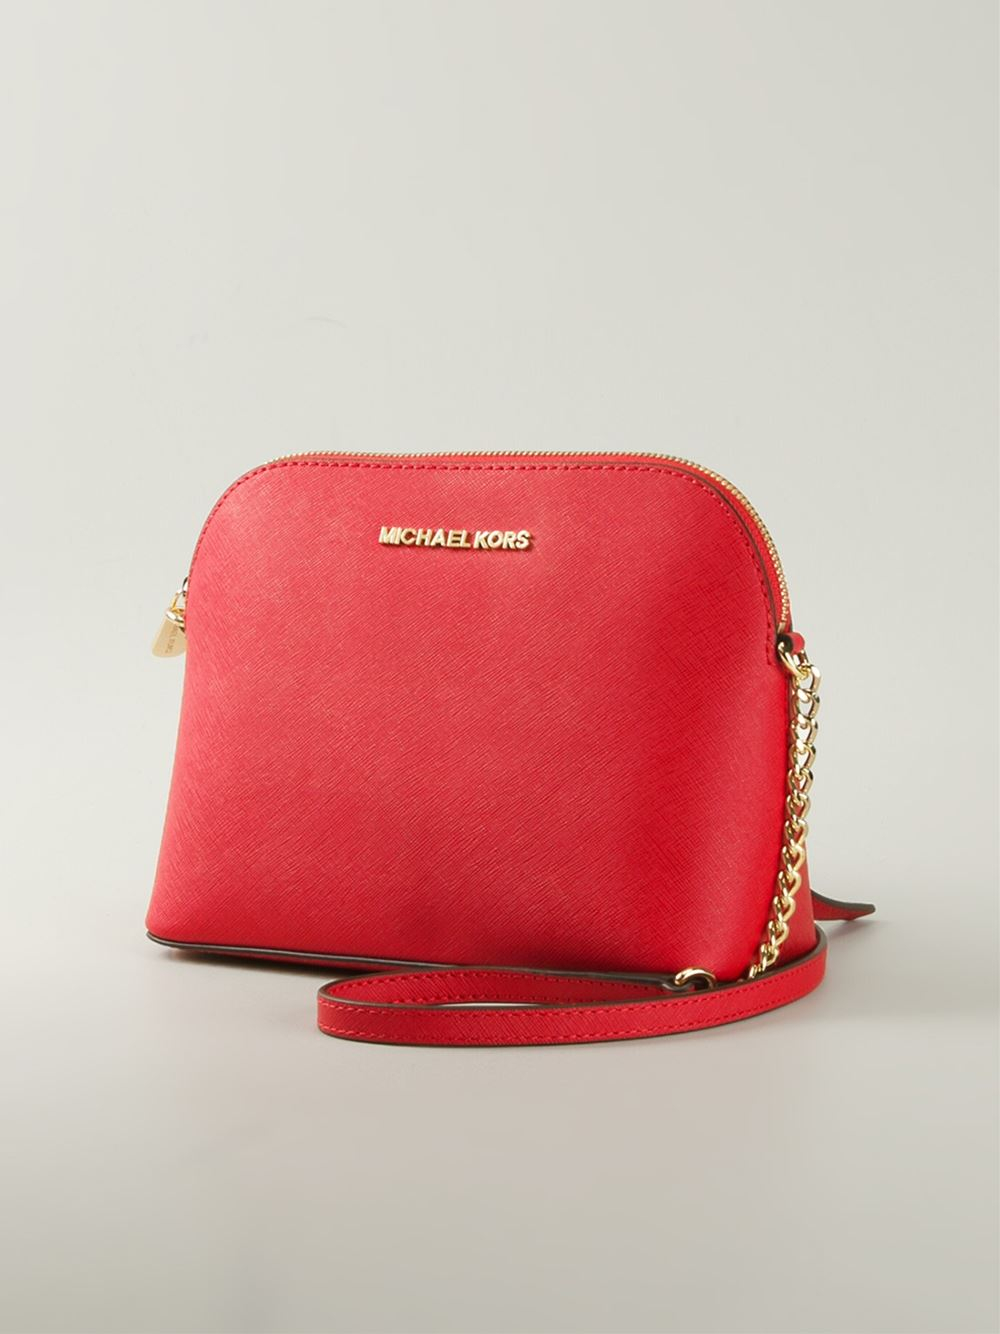 Michael kors Cindy Large Calf-Leather Cross-Body Bag in Red | Lyst